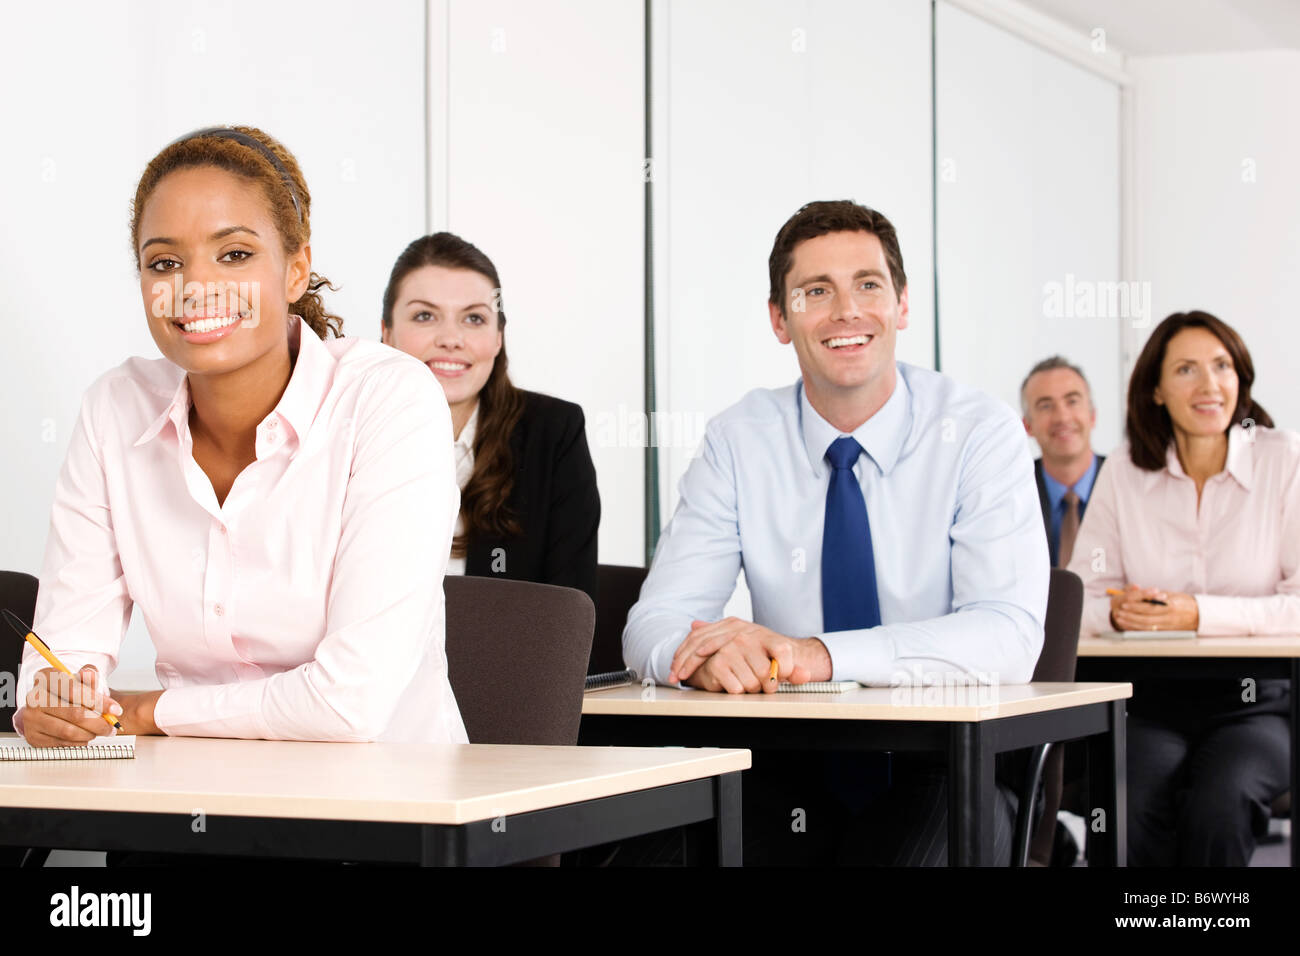 Business students in a lesson Stock Photo